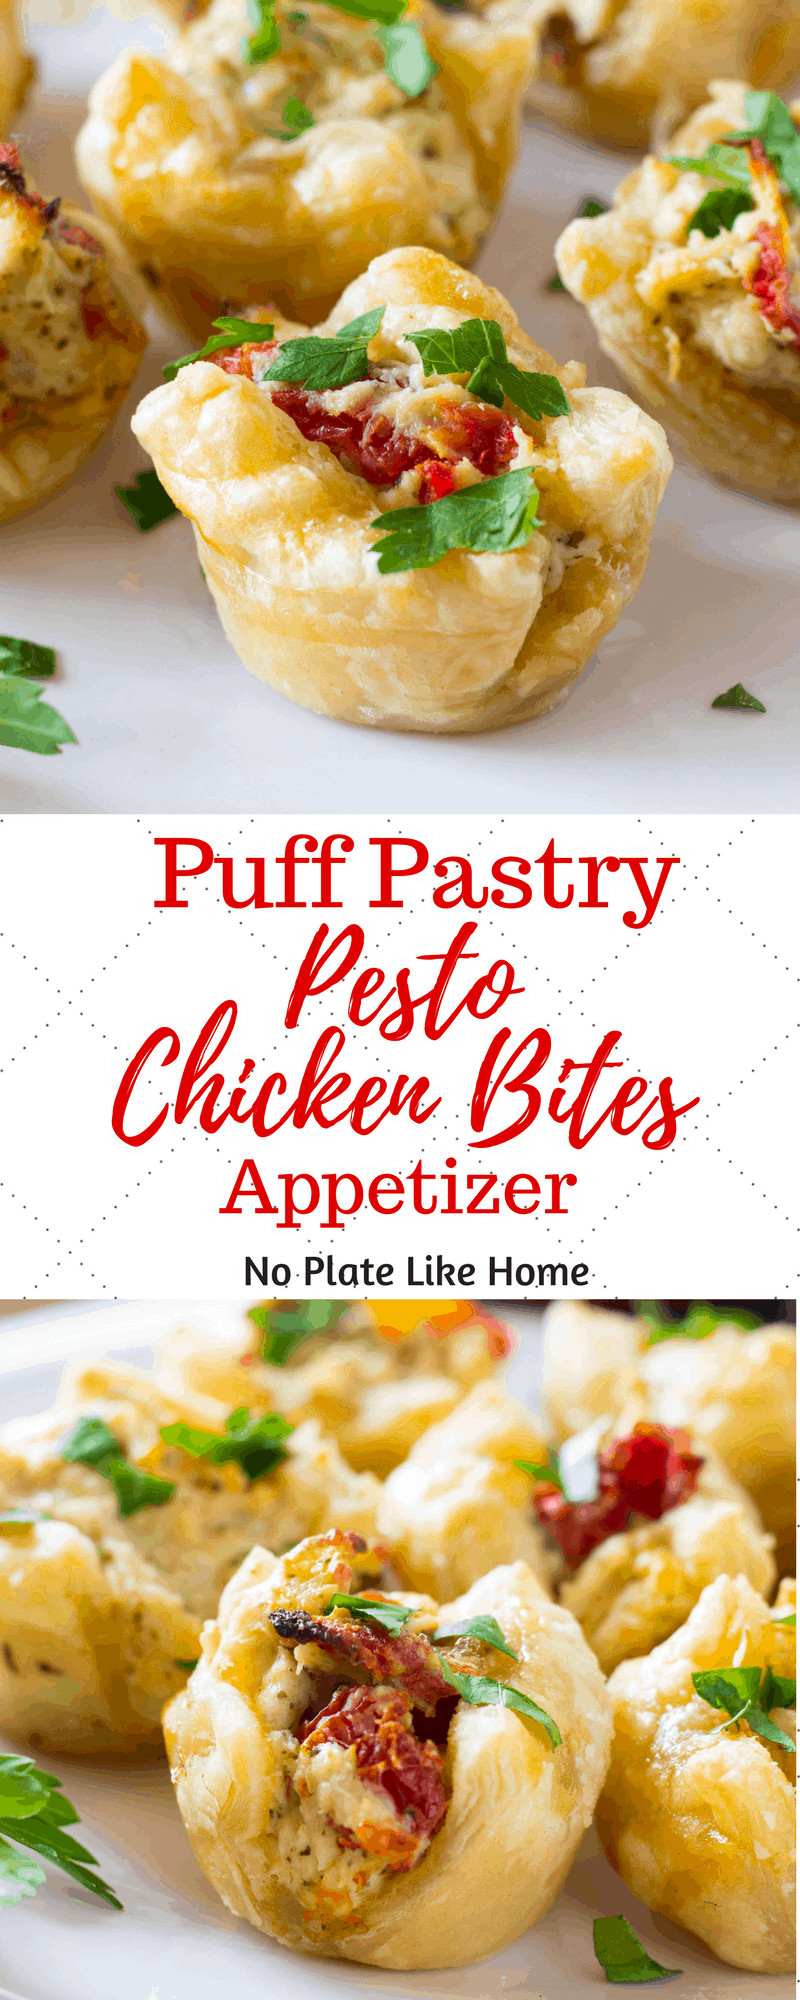 Puff Pastry Appetizers Recipes
 Puff Pastry Pesto Chicken Bites Appetizer No Plate Like Home